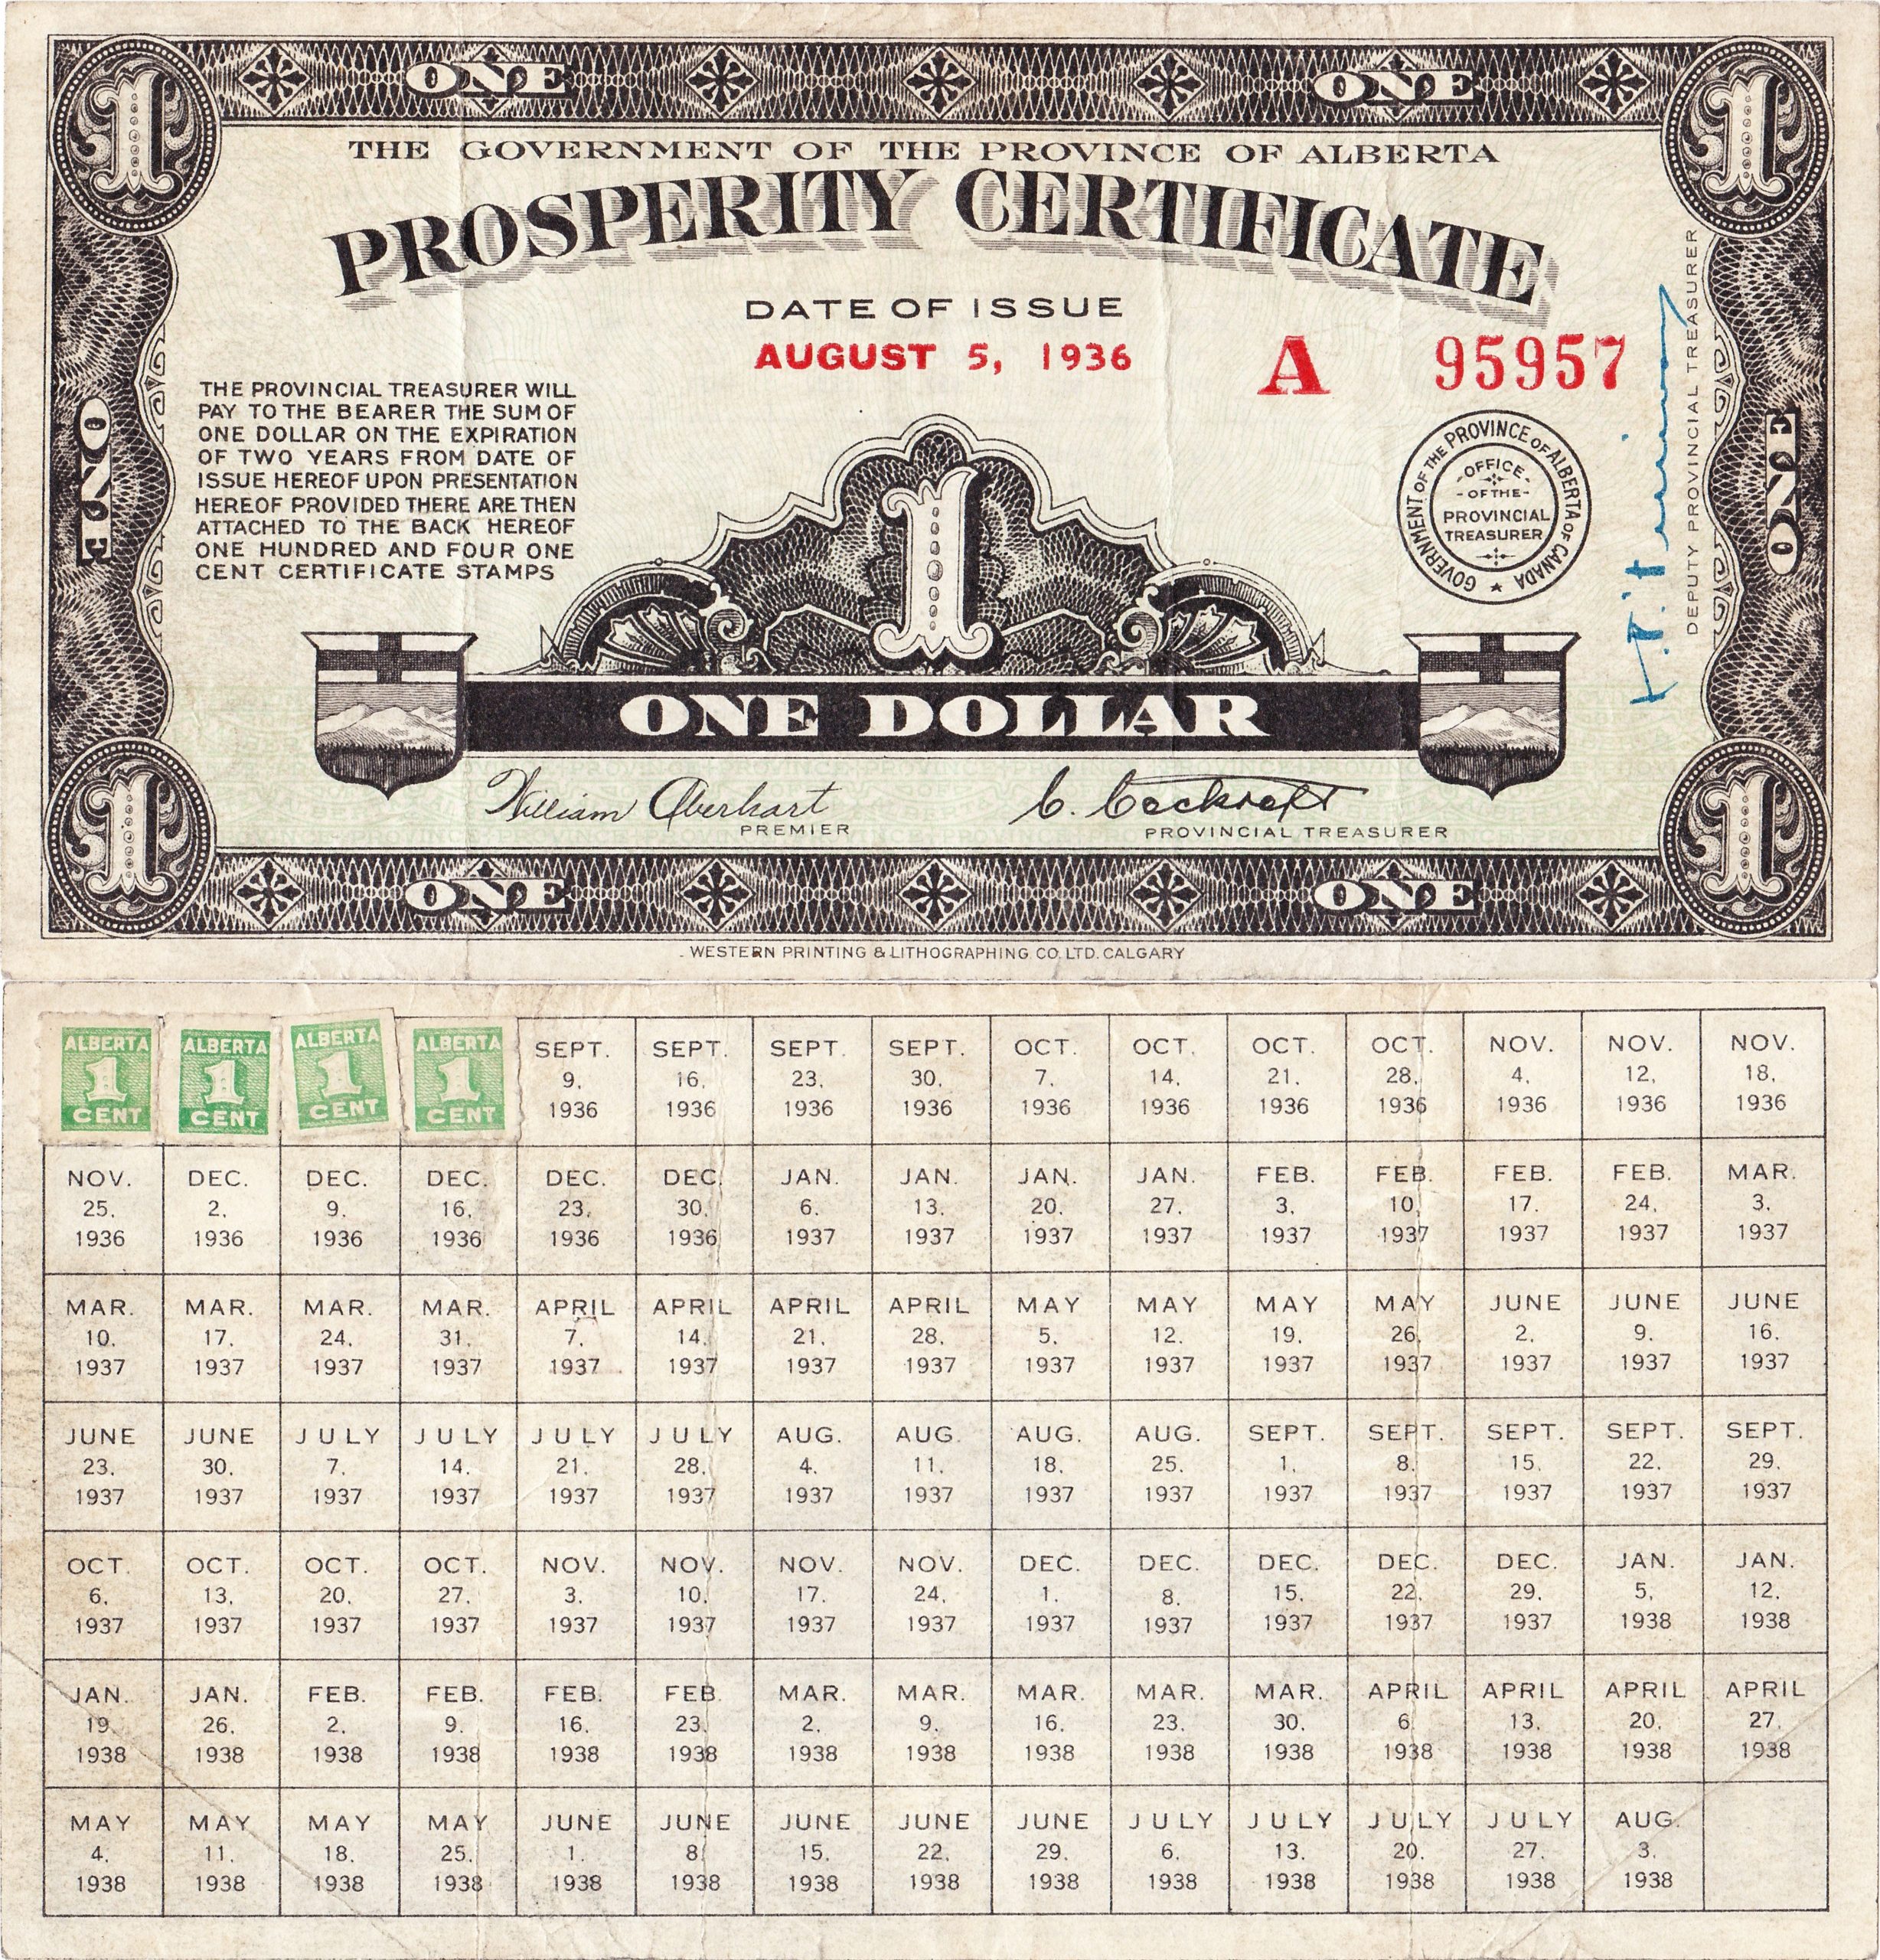 A dollar attached to a certificate with spaces for 104 stamps (weekly for two years).